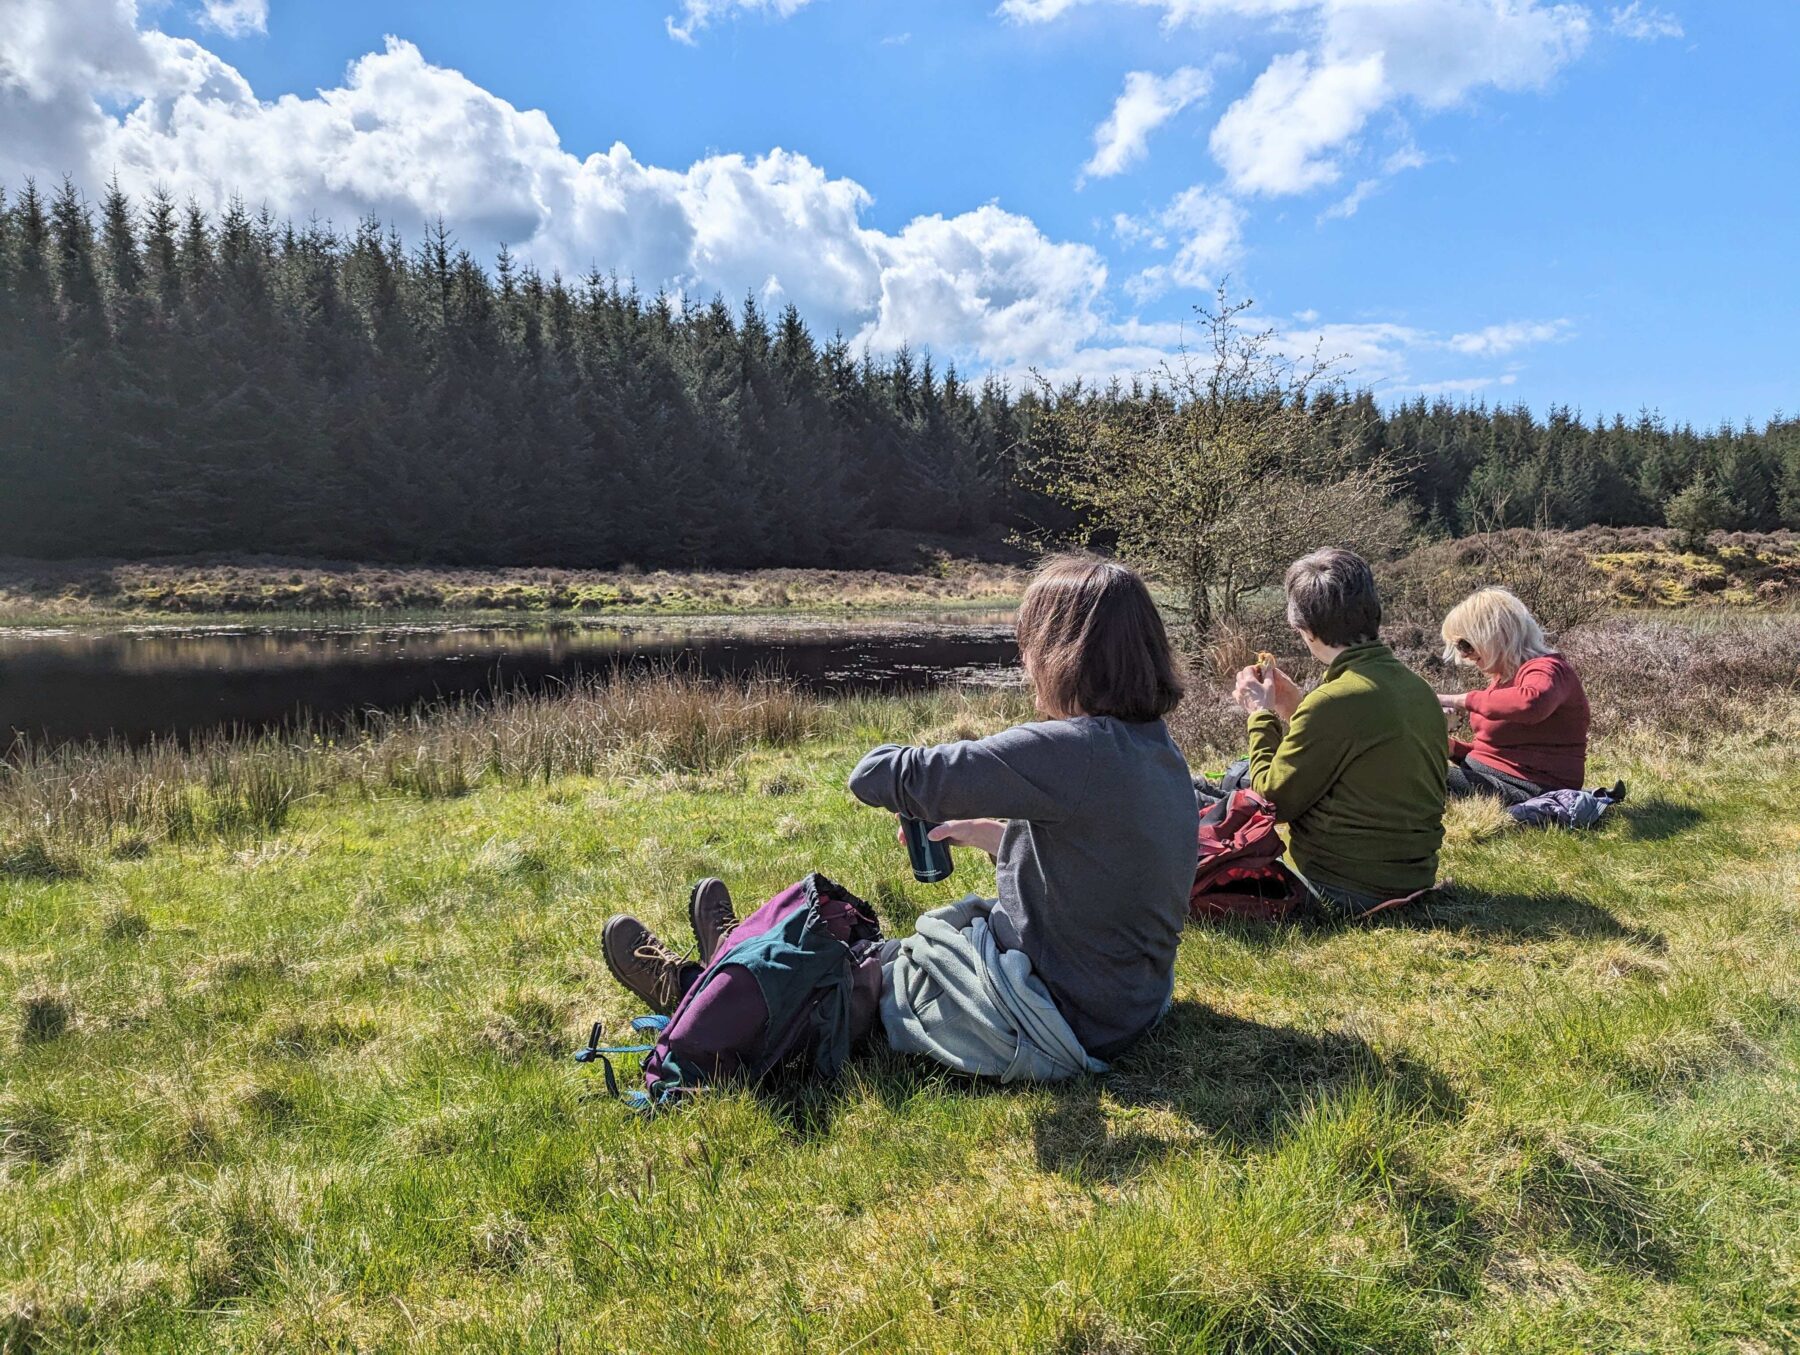 Three walkers sit on the grass beside a loch, surrounded by forest